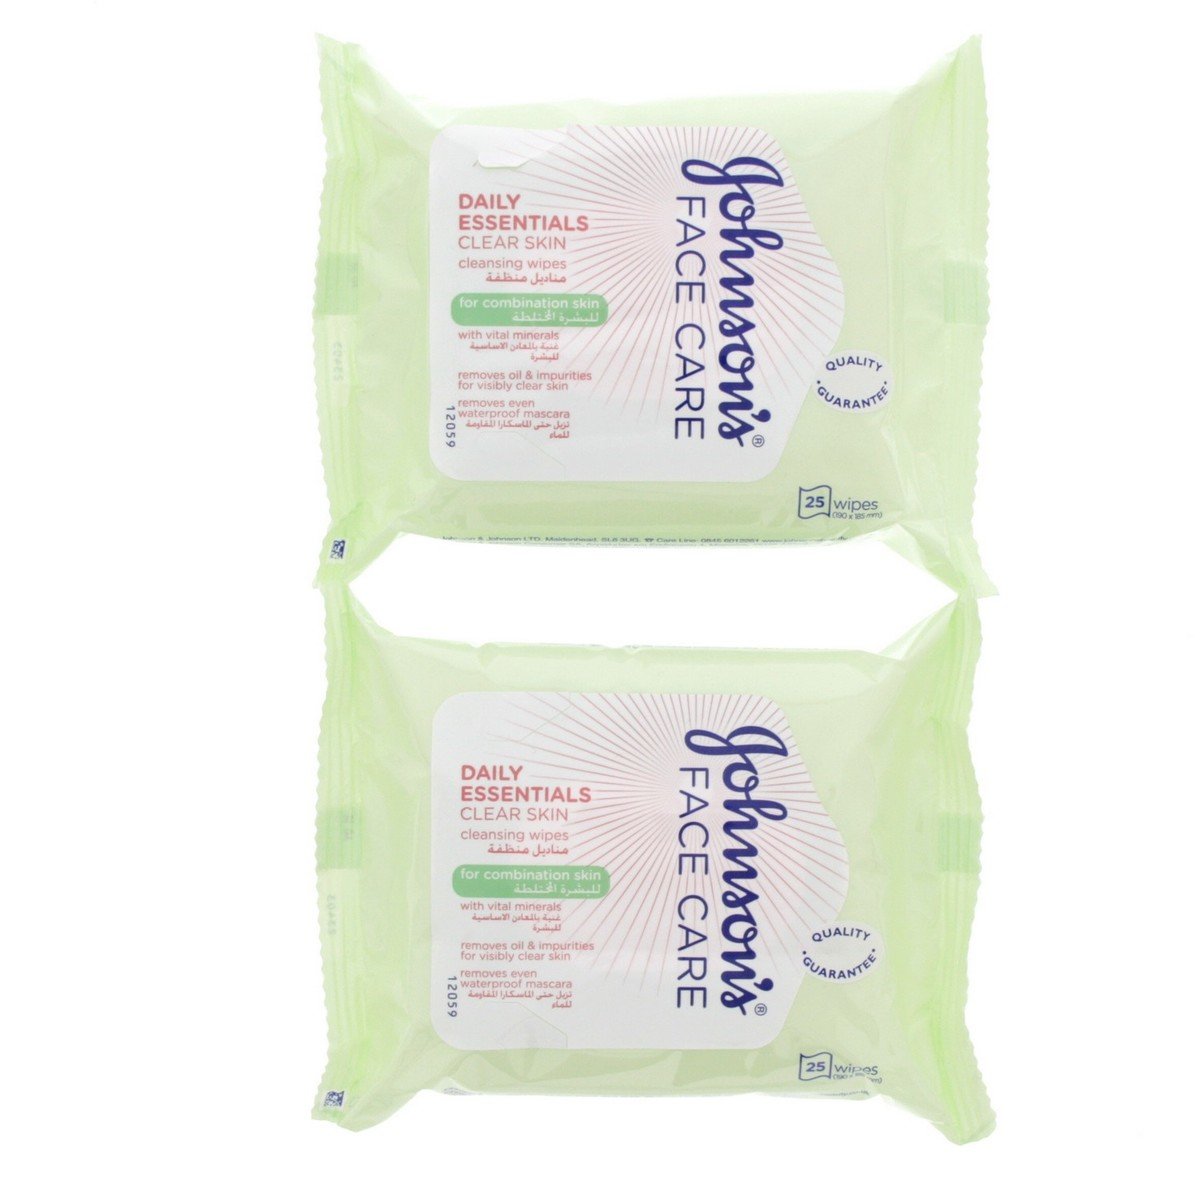 Johnson's Daily Essentials Clear Skin Cleansing Wipes 2 x 25 pcs